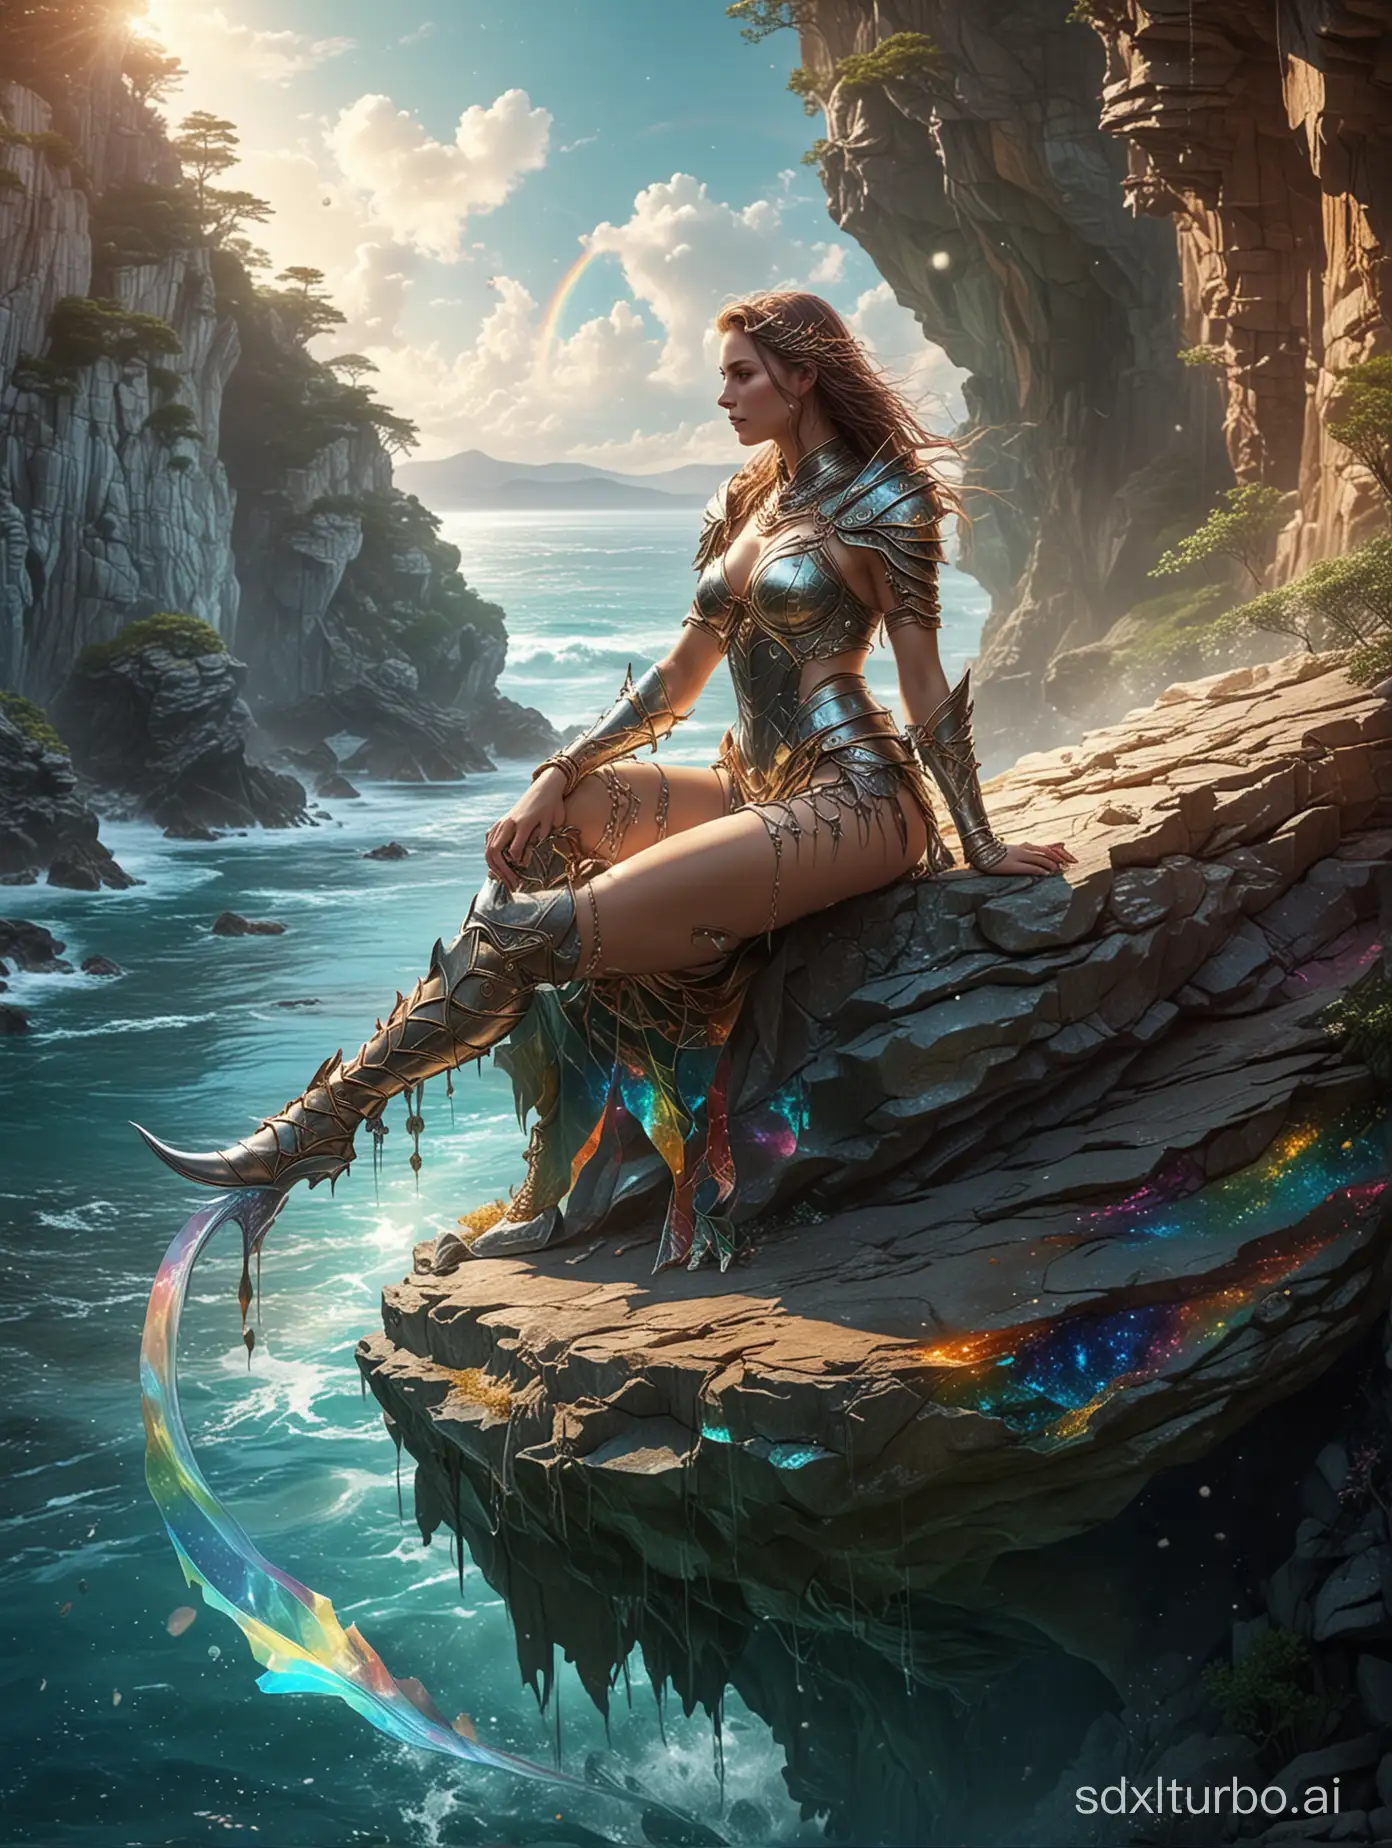 Mythical-Warrior-Princess-Relaxing-by-the-Sea-in-Stylish-Bikini-Armor-Set